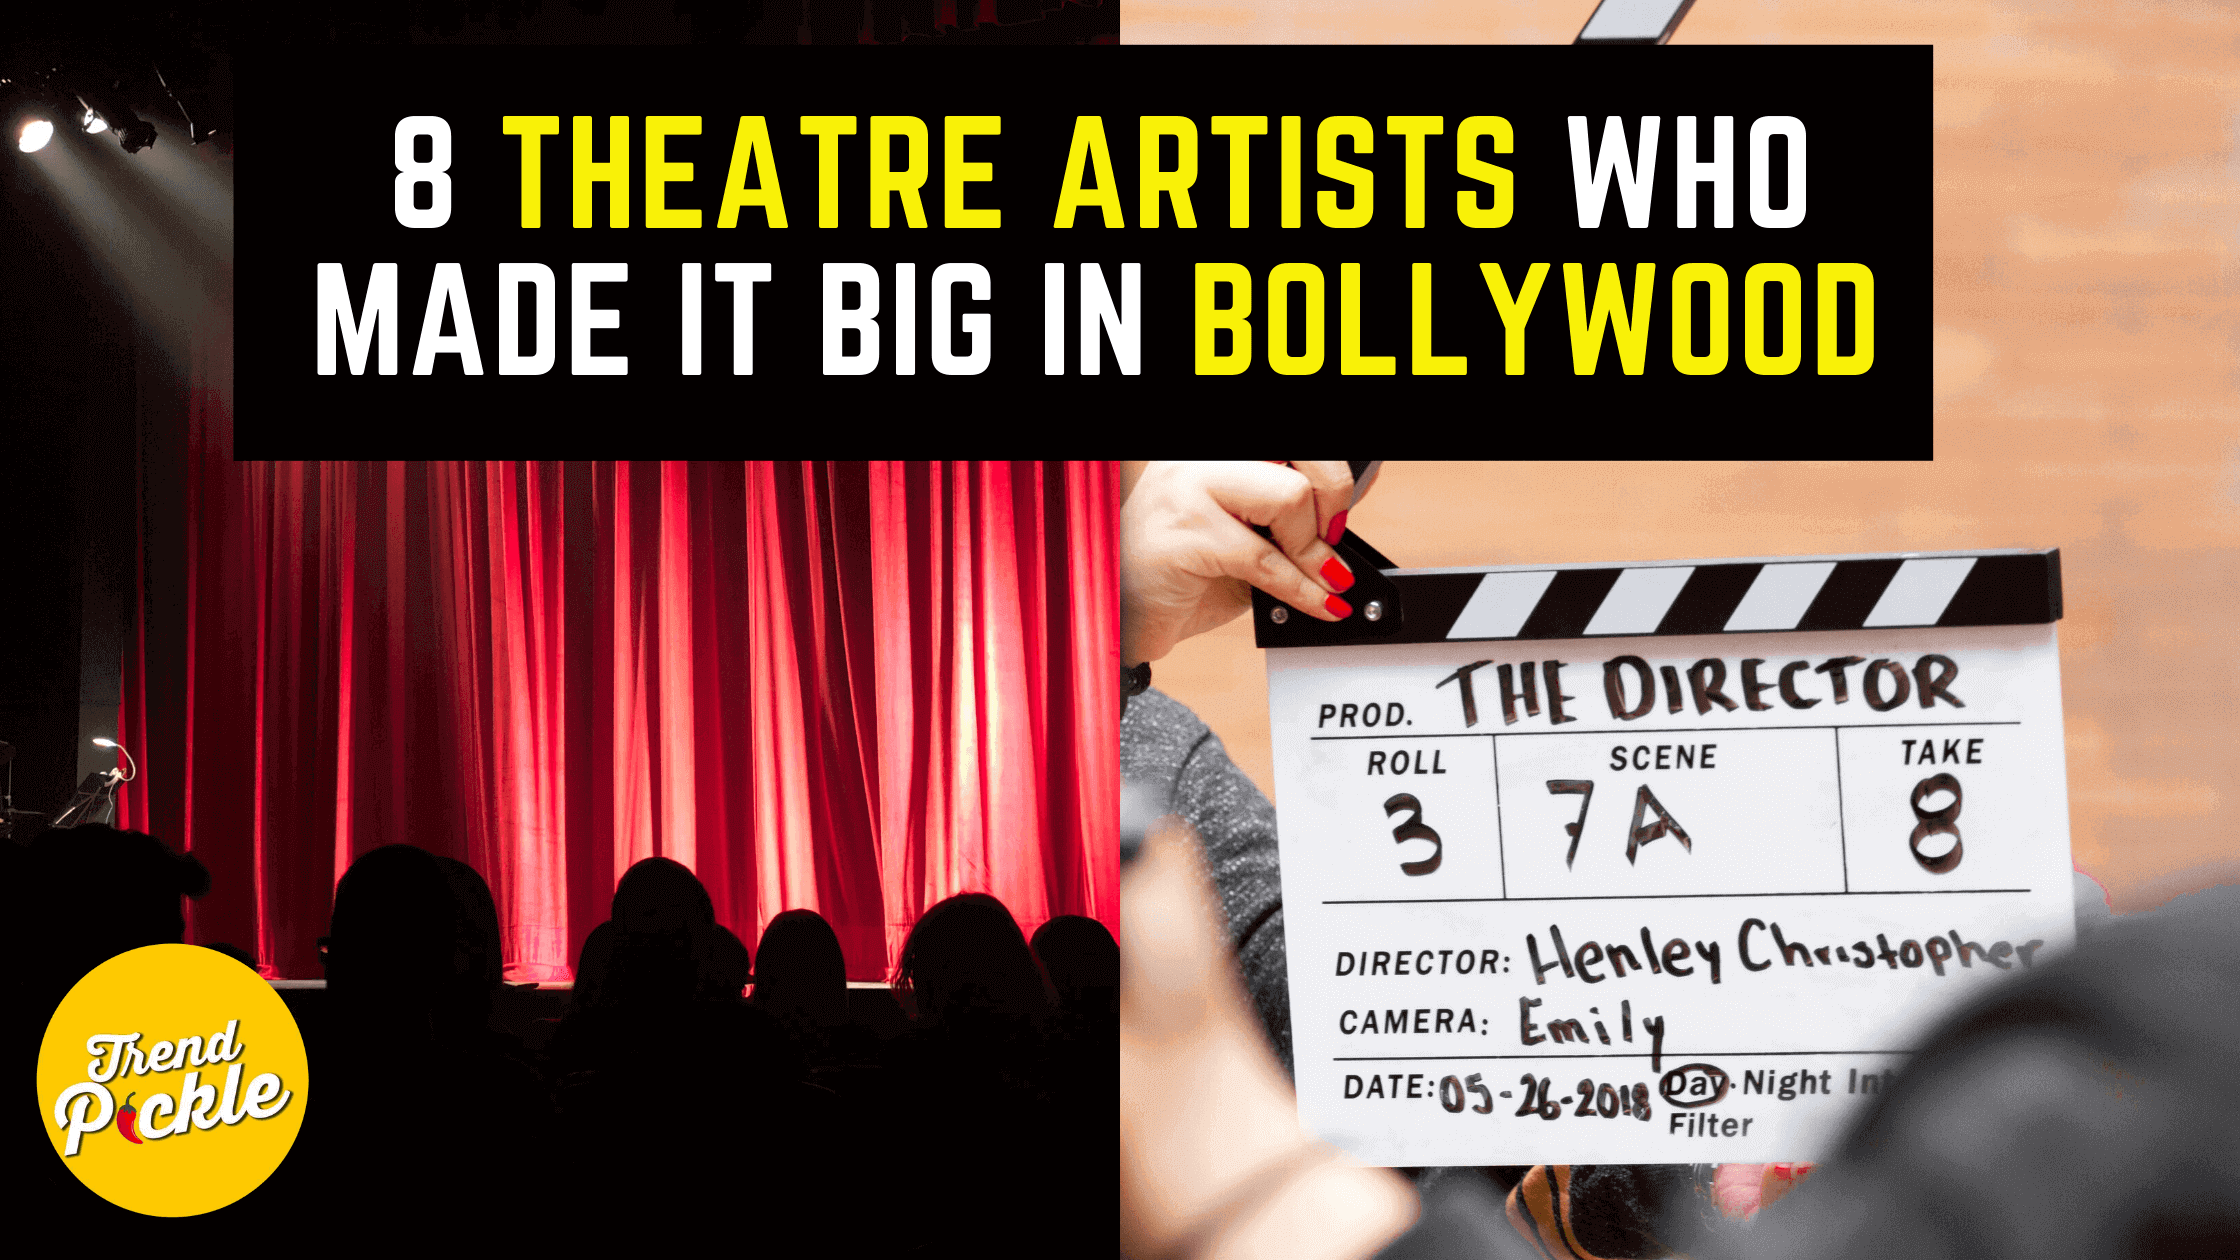 Theatre artists who made it big in Bollywood